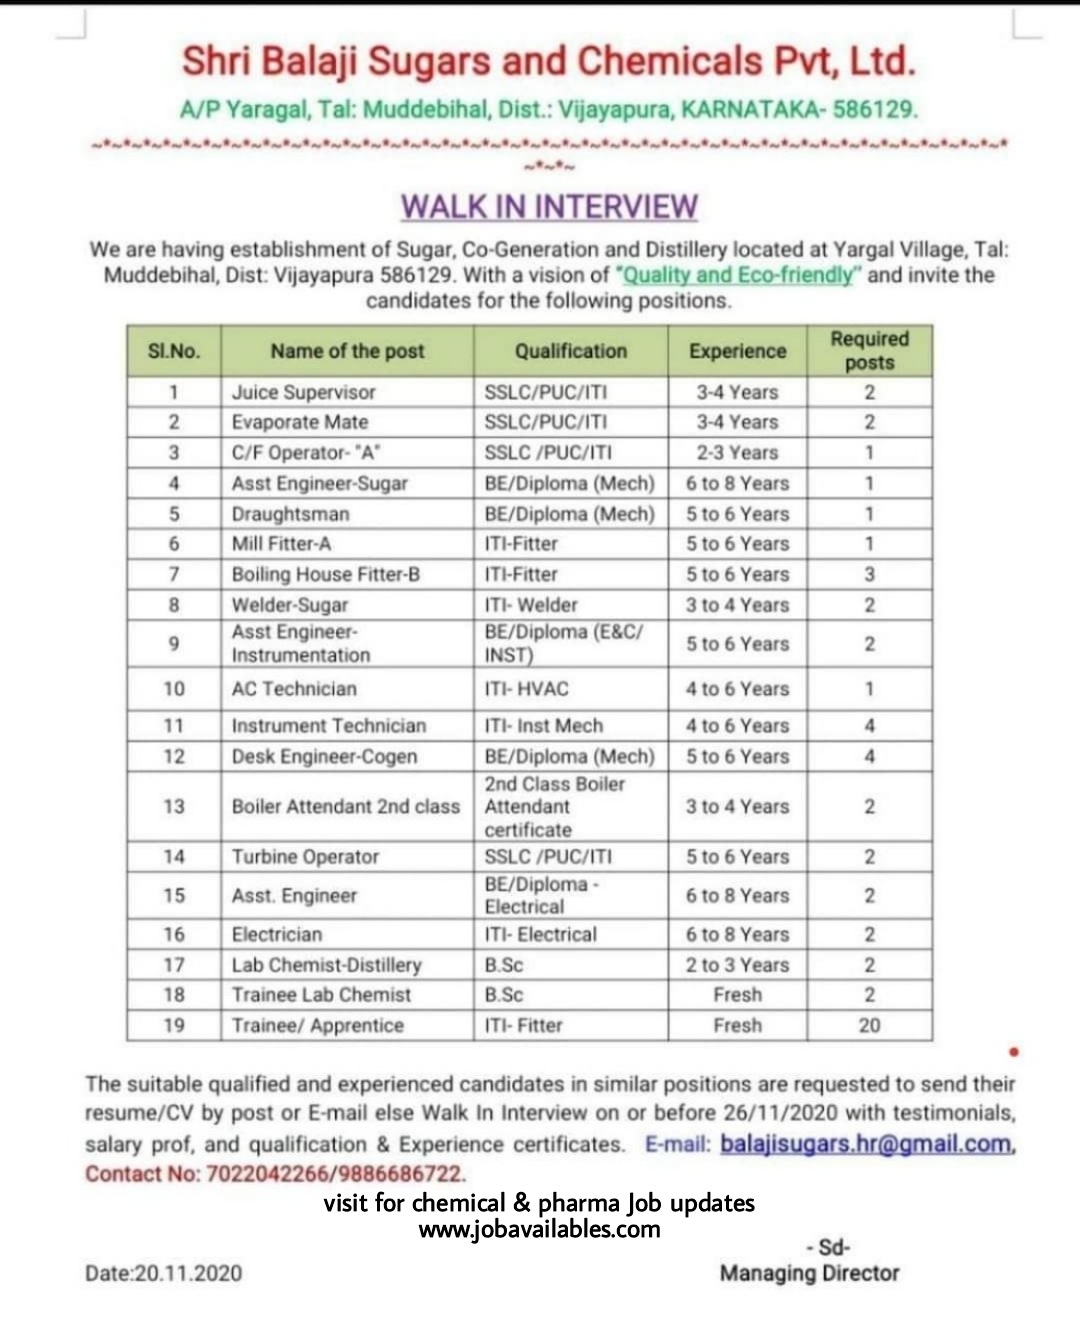 Job Availables, Shri Balaji Sugars & Chemicals Pvt Ltd Walk In Interview For Multiple Positions